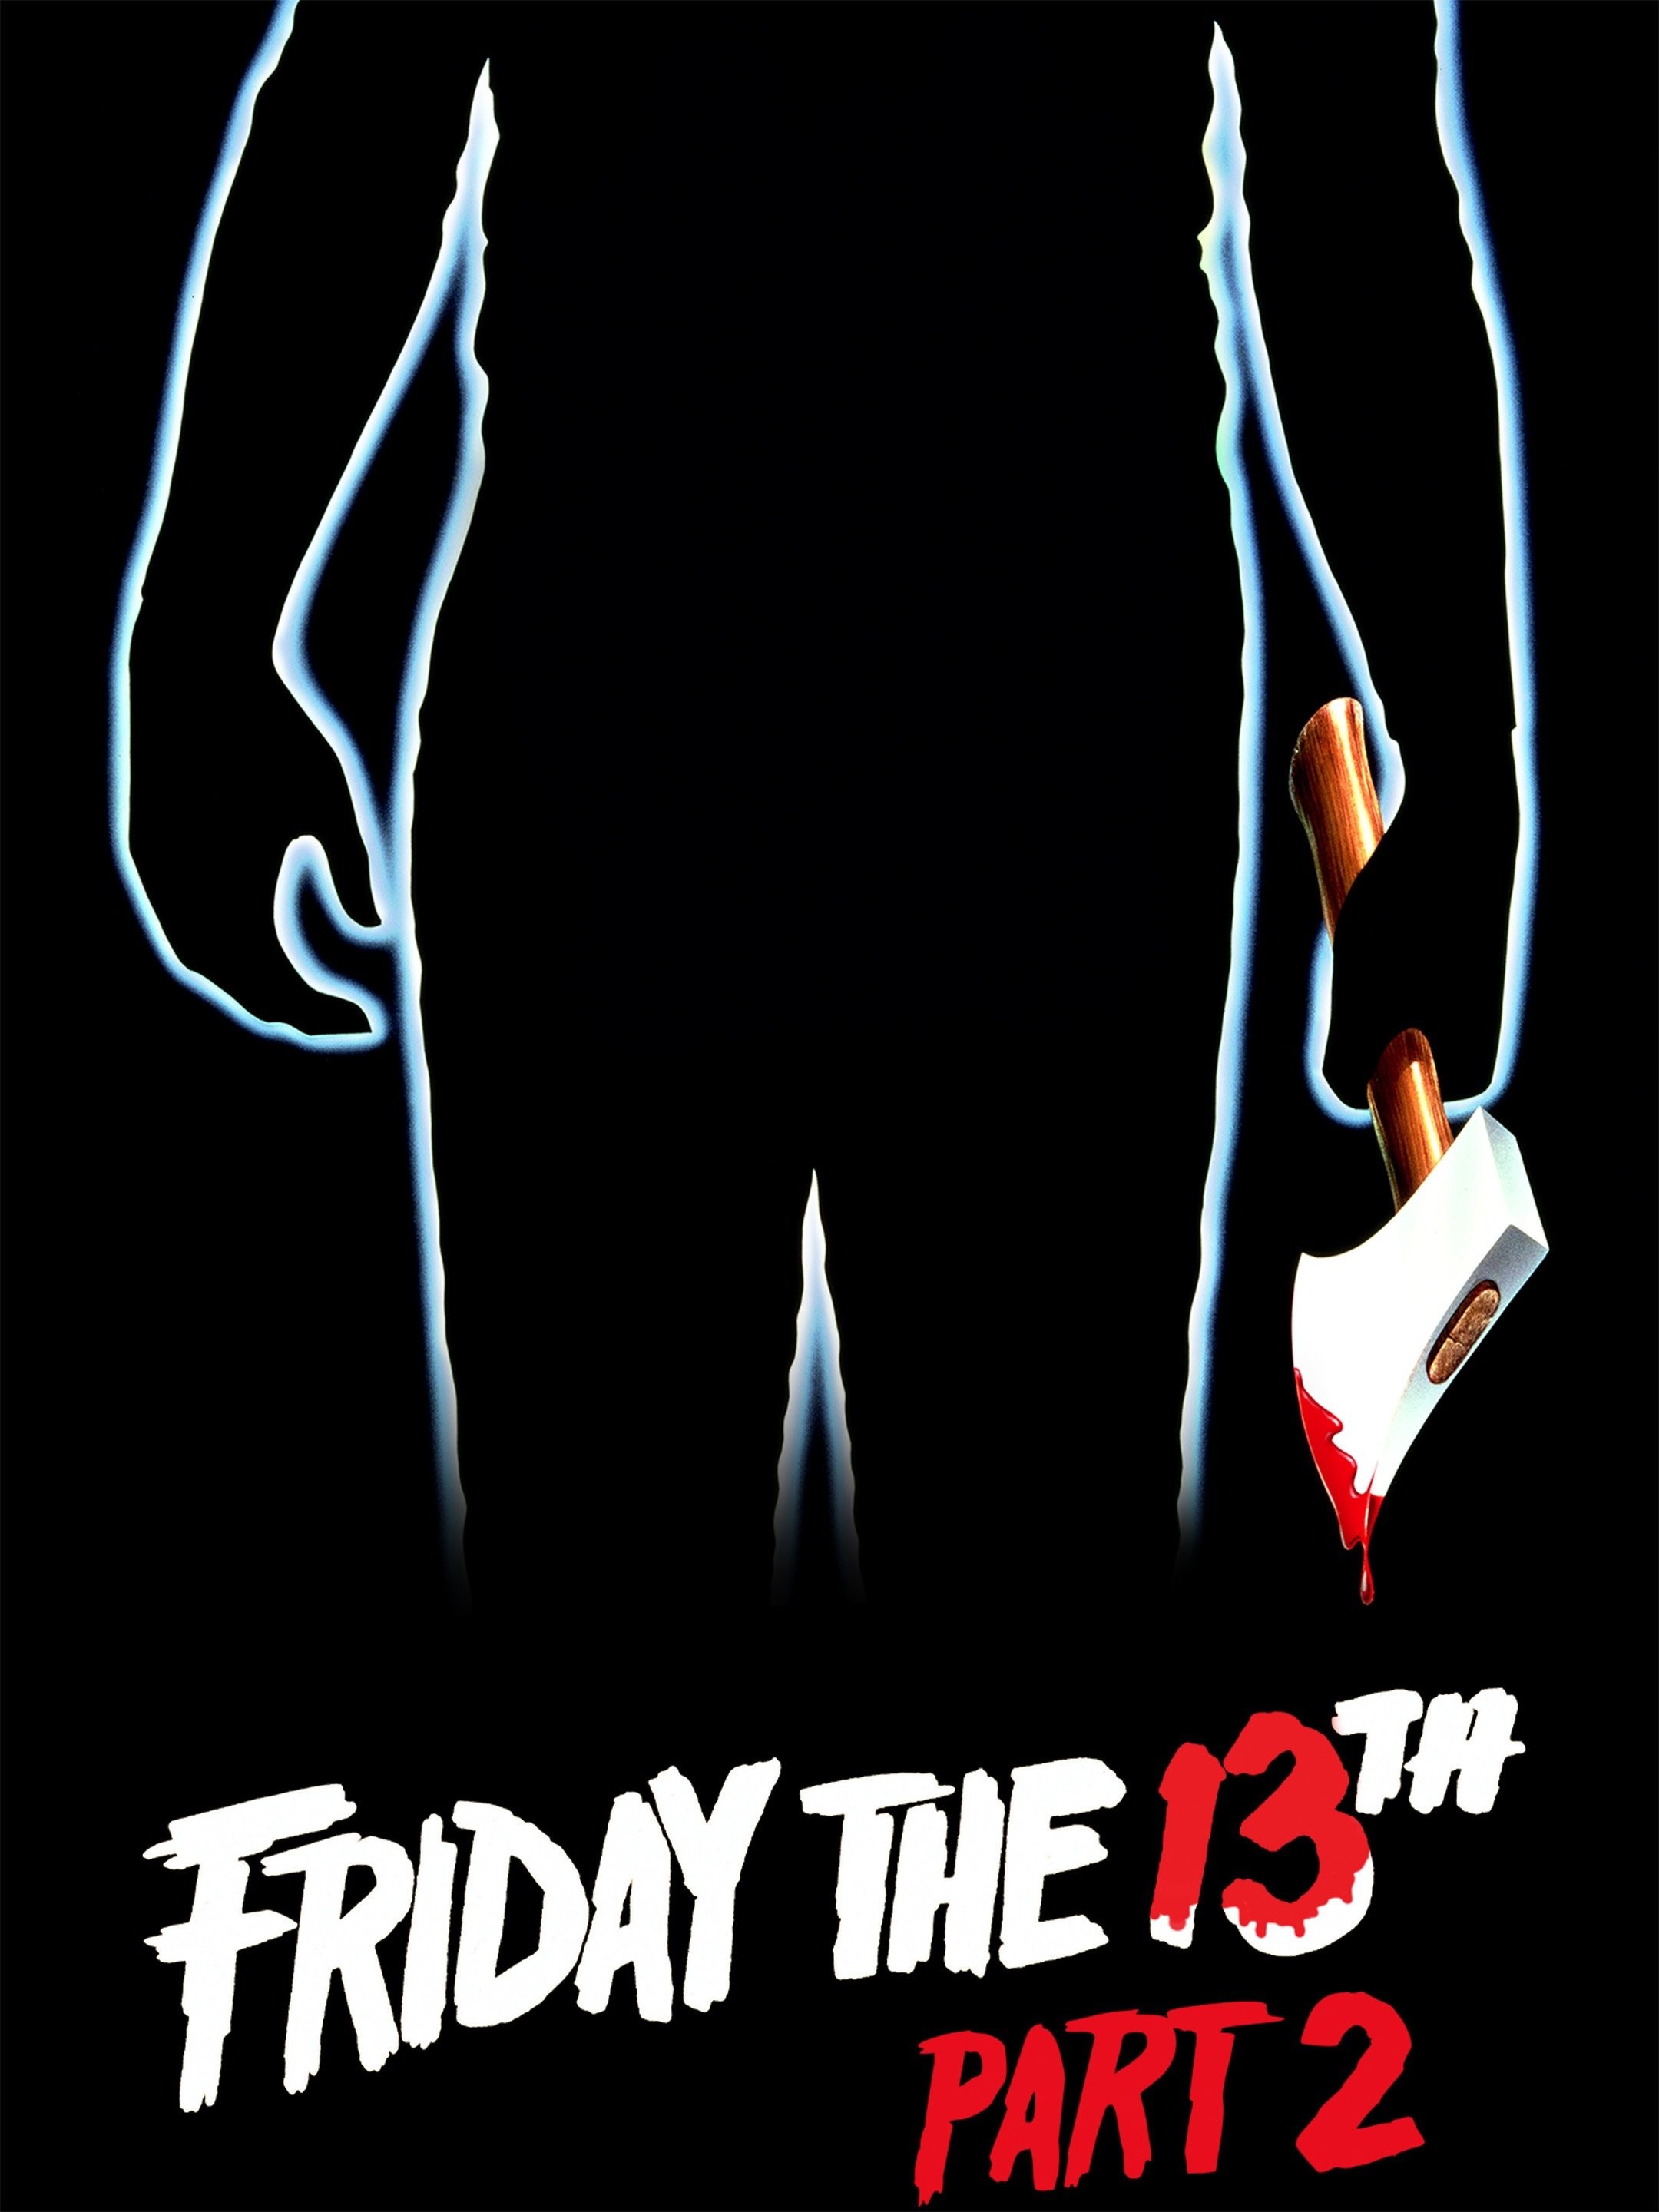 Friday the 13th Part 2 - Wikipedia